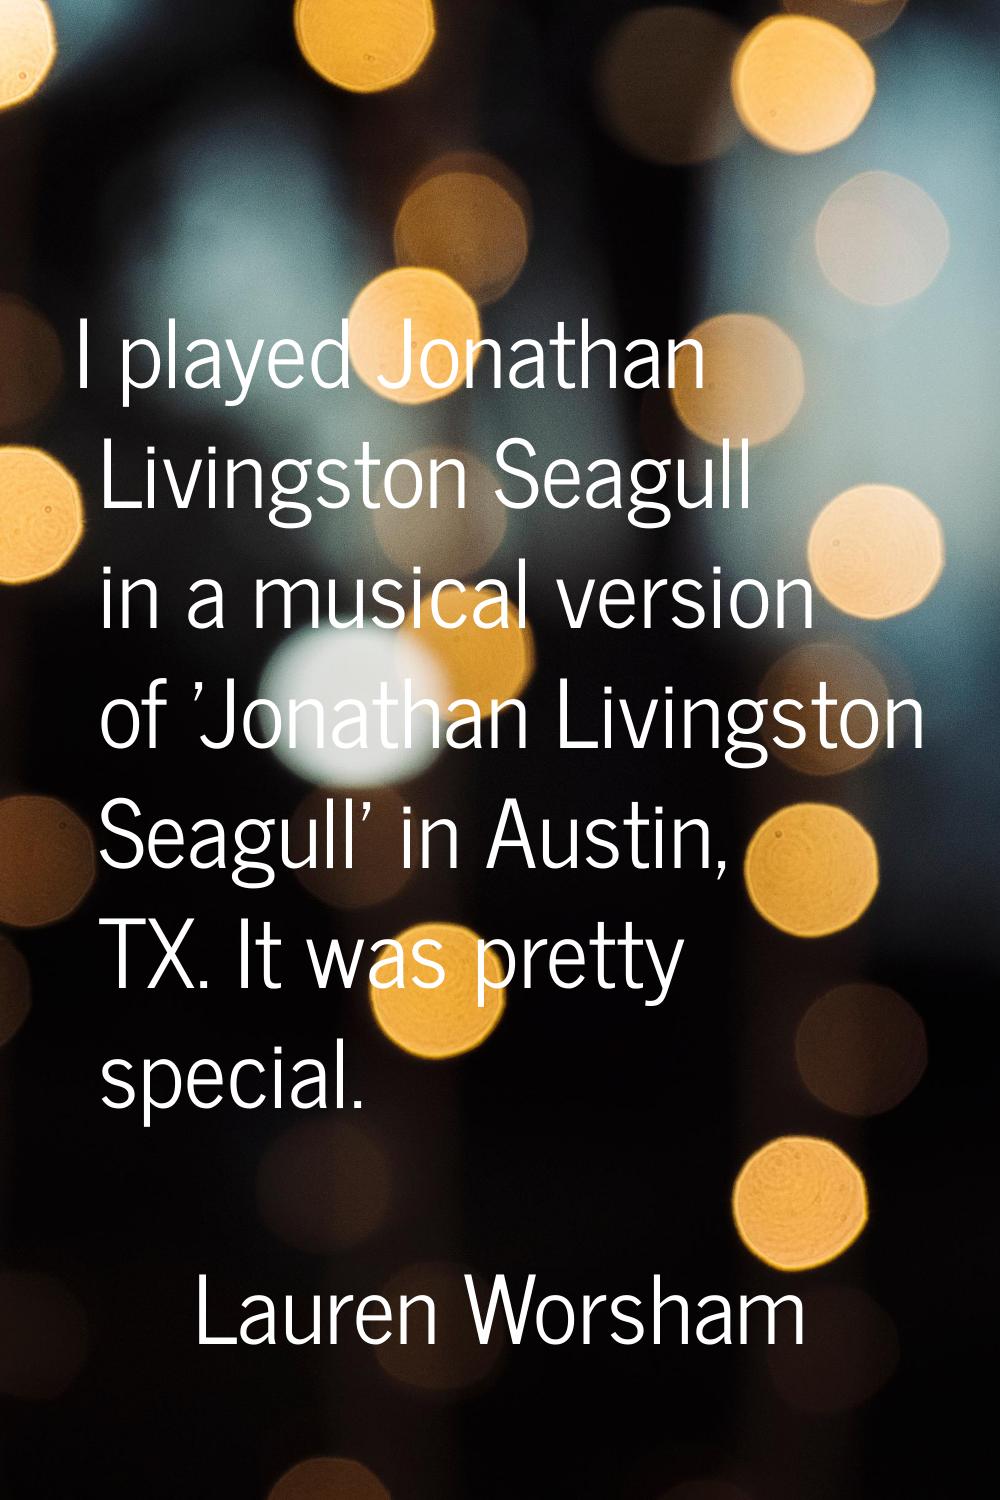 I played Jonathan Livingston Seagull in a musical version of 'Jonathan Livingston Seagull' in Austi